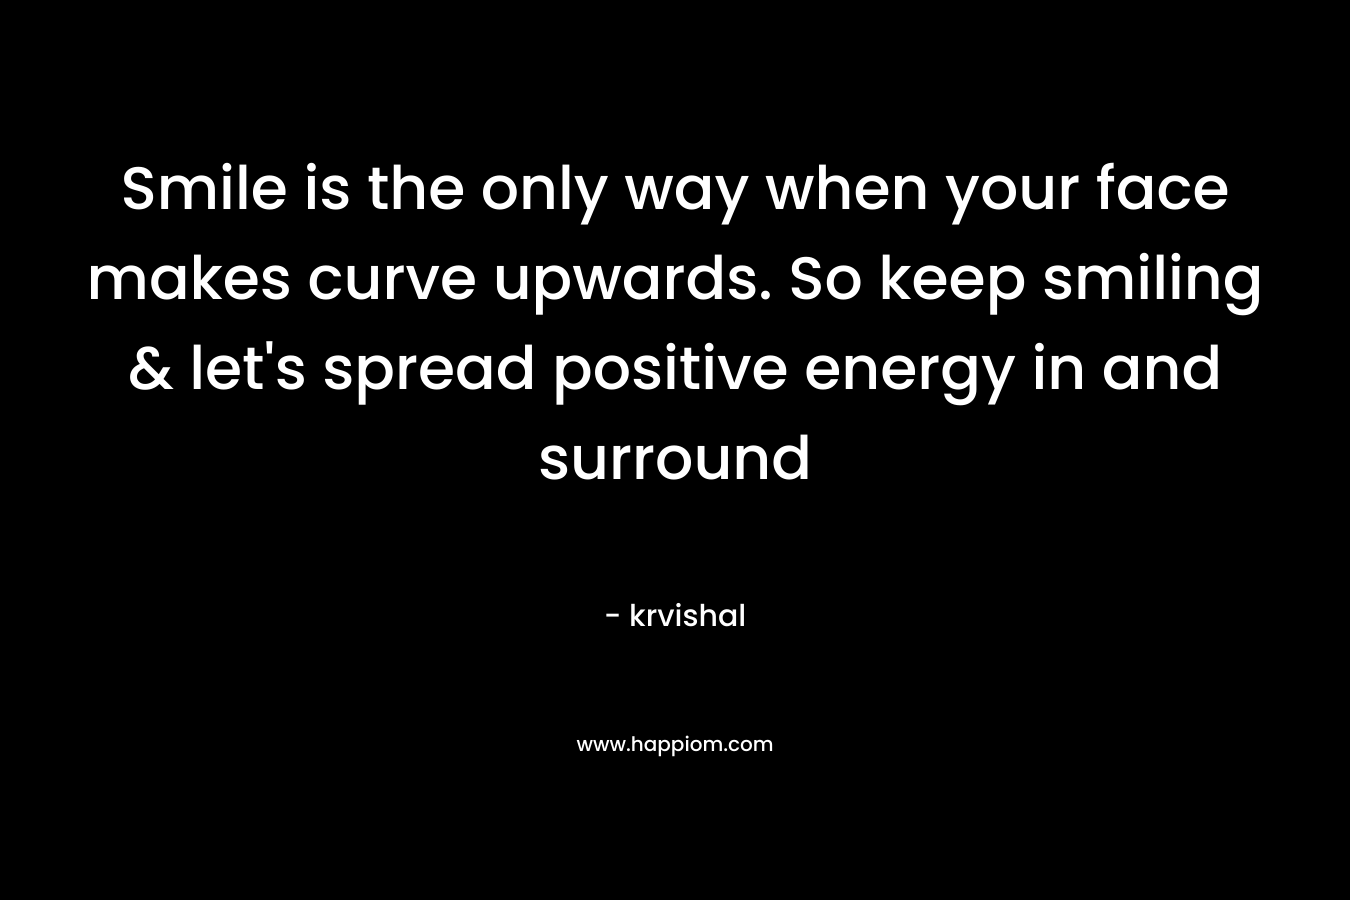 Smile is the only way when your face makes curve upwards. So keep smiling & let’s spread positive energy in and surround – krvishal